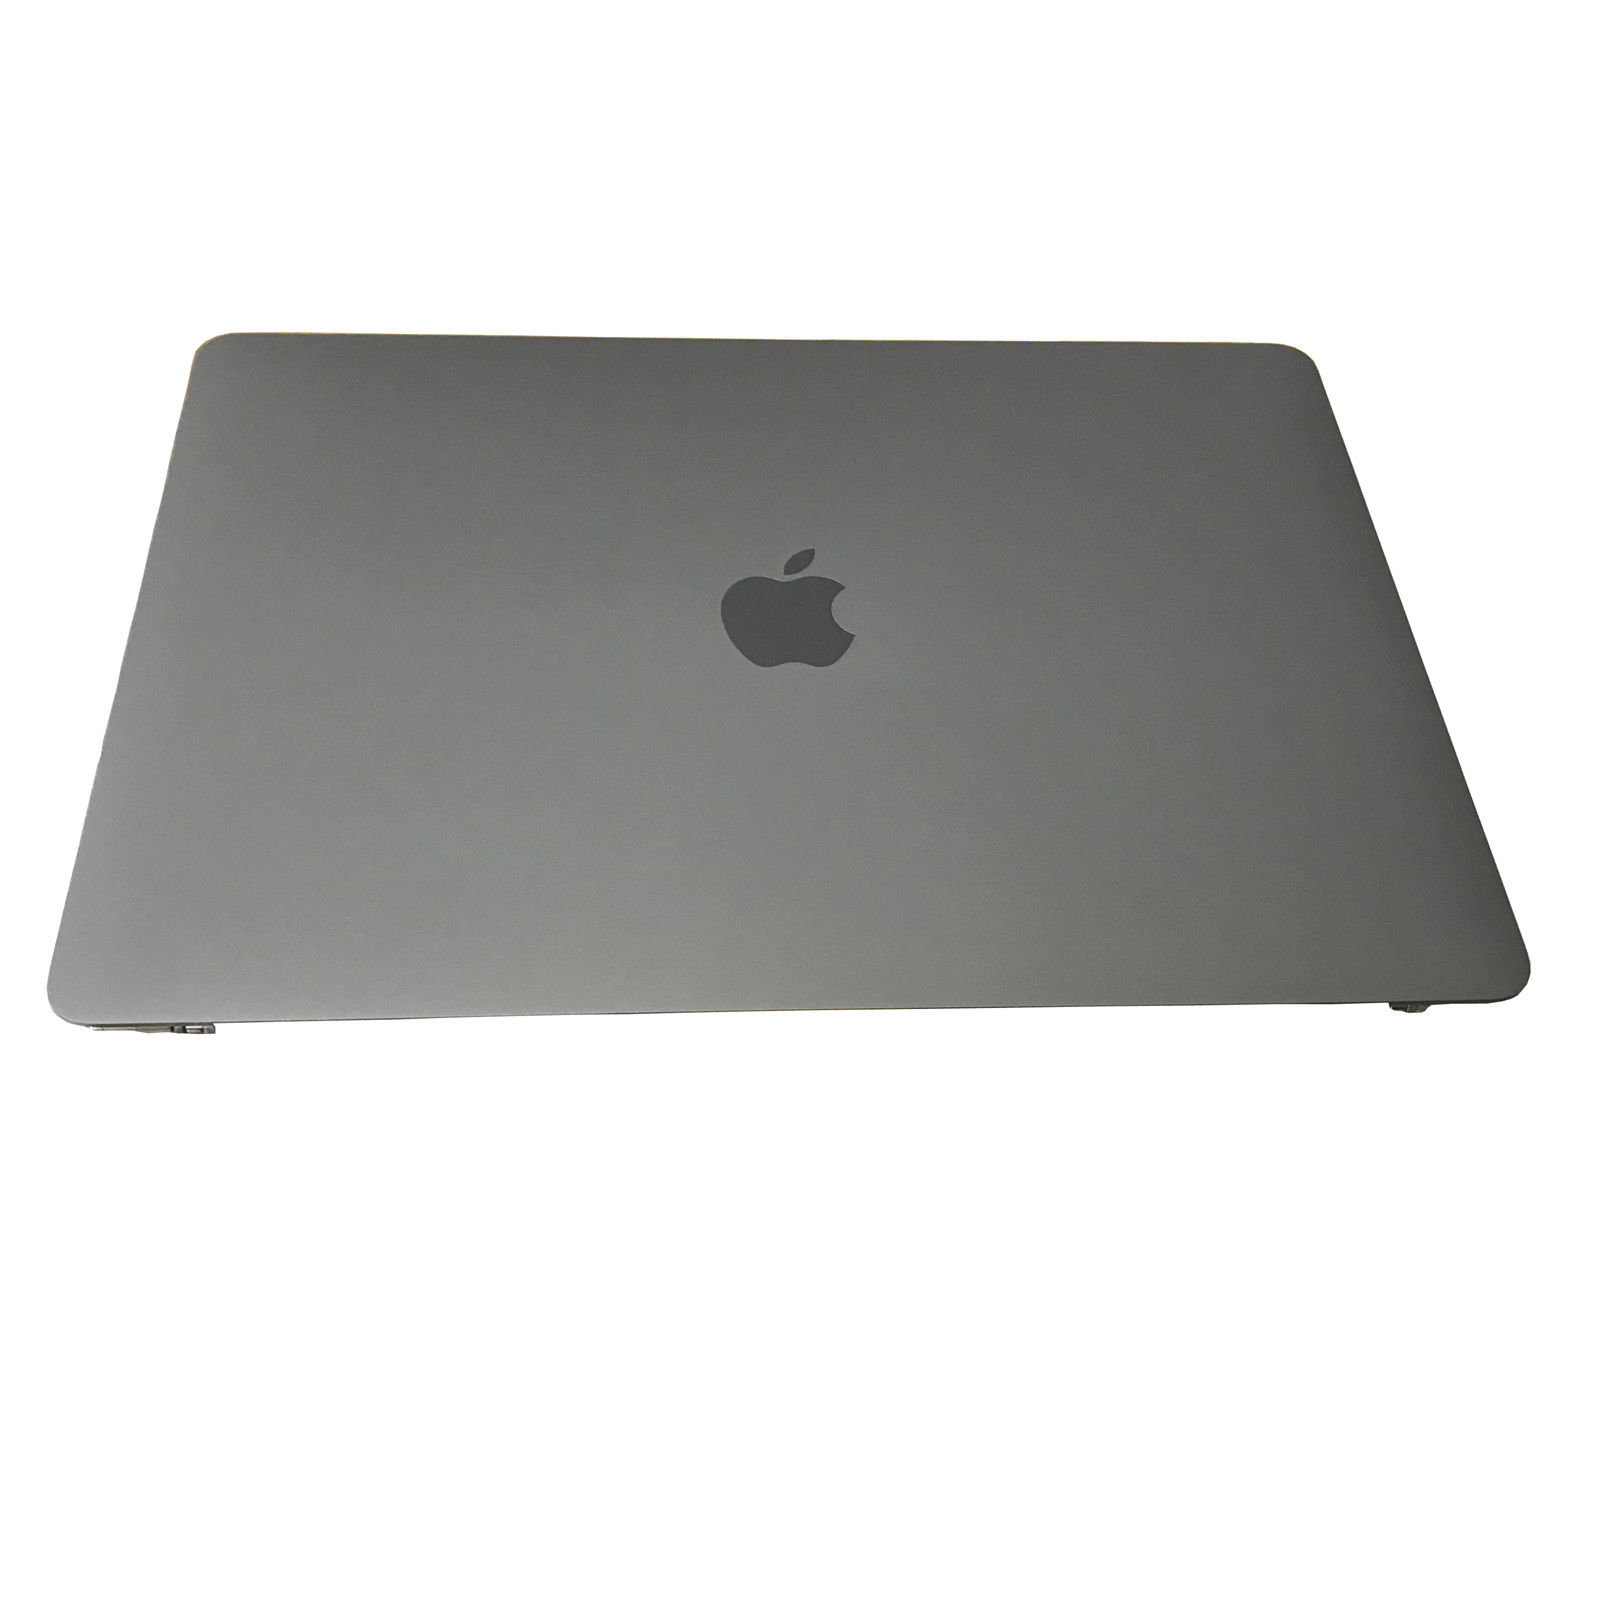 London MacBook Pro A1706 LCD Screen Replacement (13-inch)